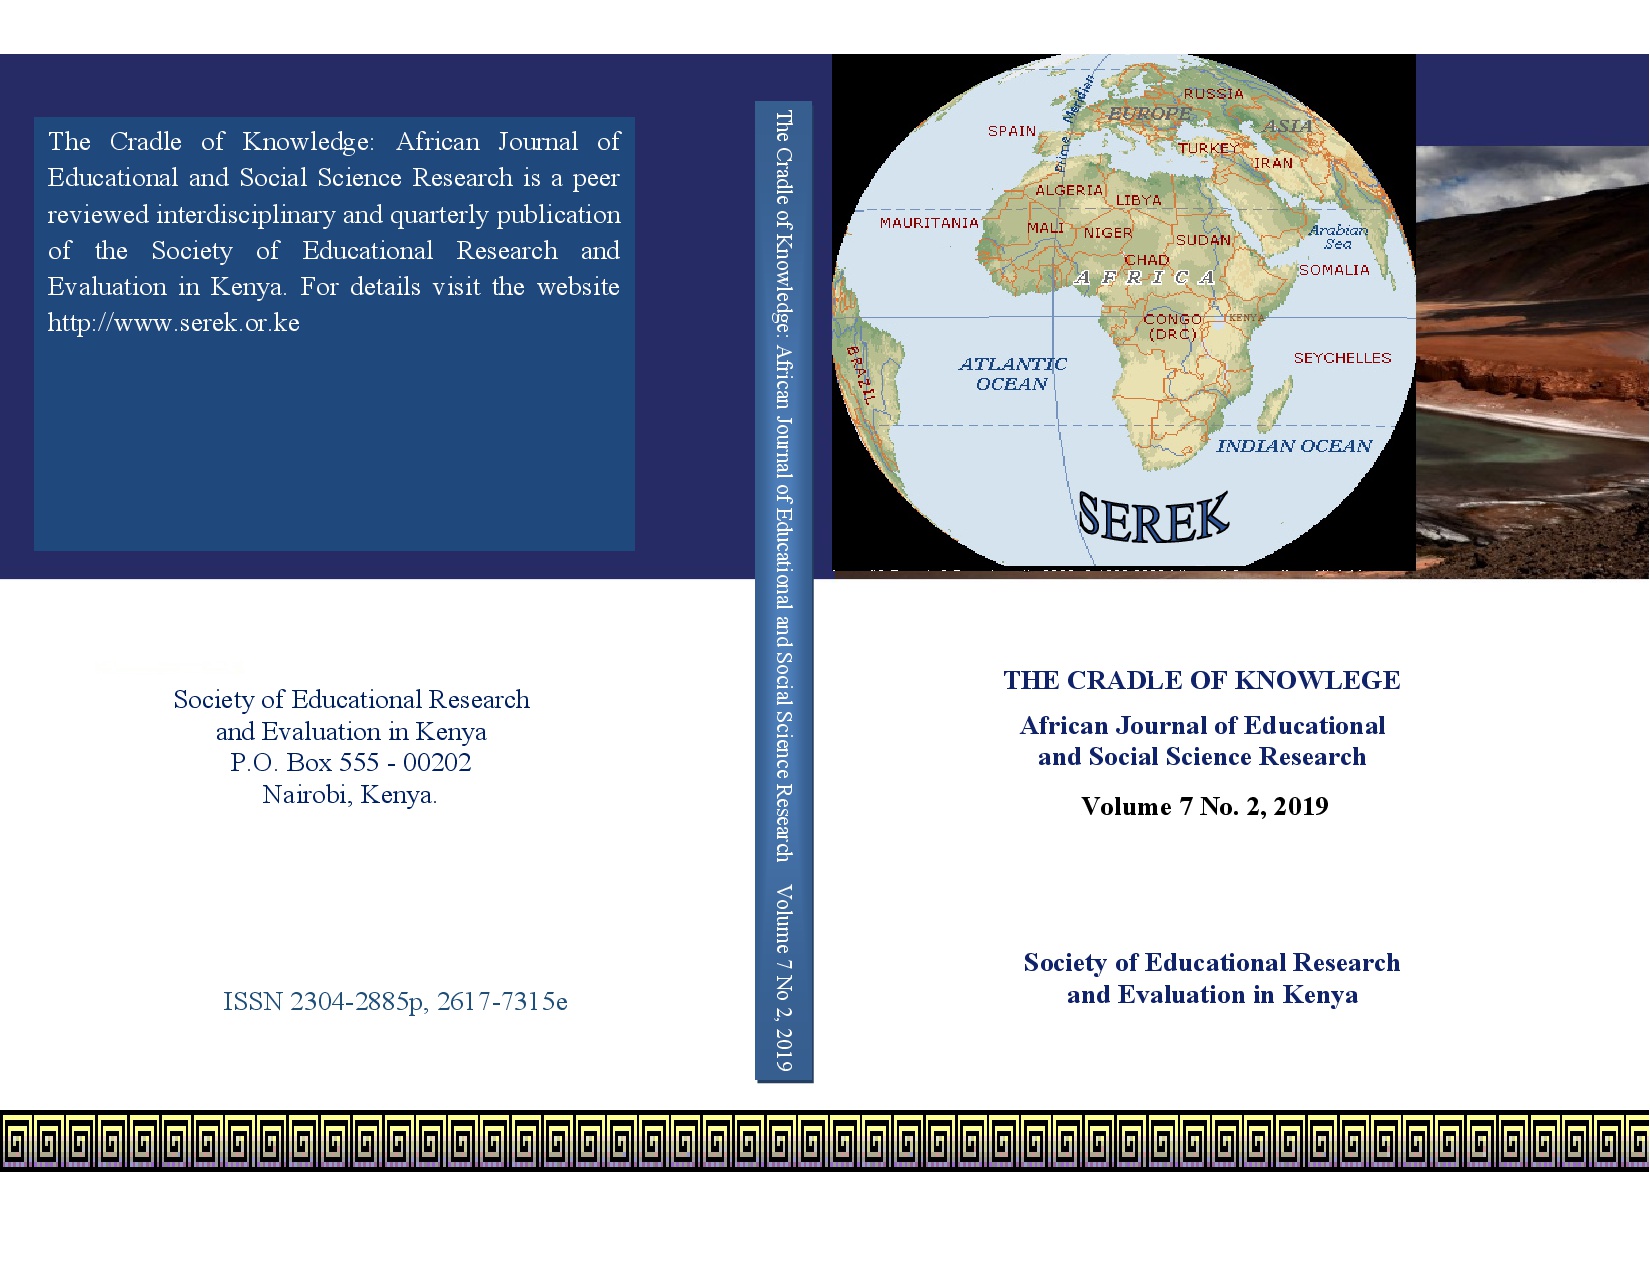 The Cradle of Knowledge: African Journal of Educational and Social Science Research Volume 7 No.2, 2019 ISSN 2304-2885-p, 2617-7315e